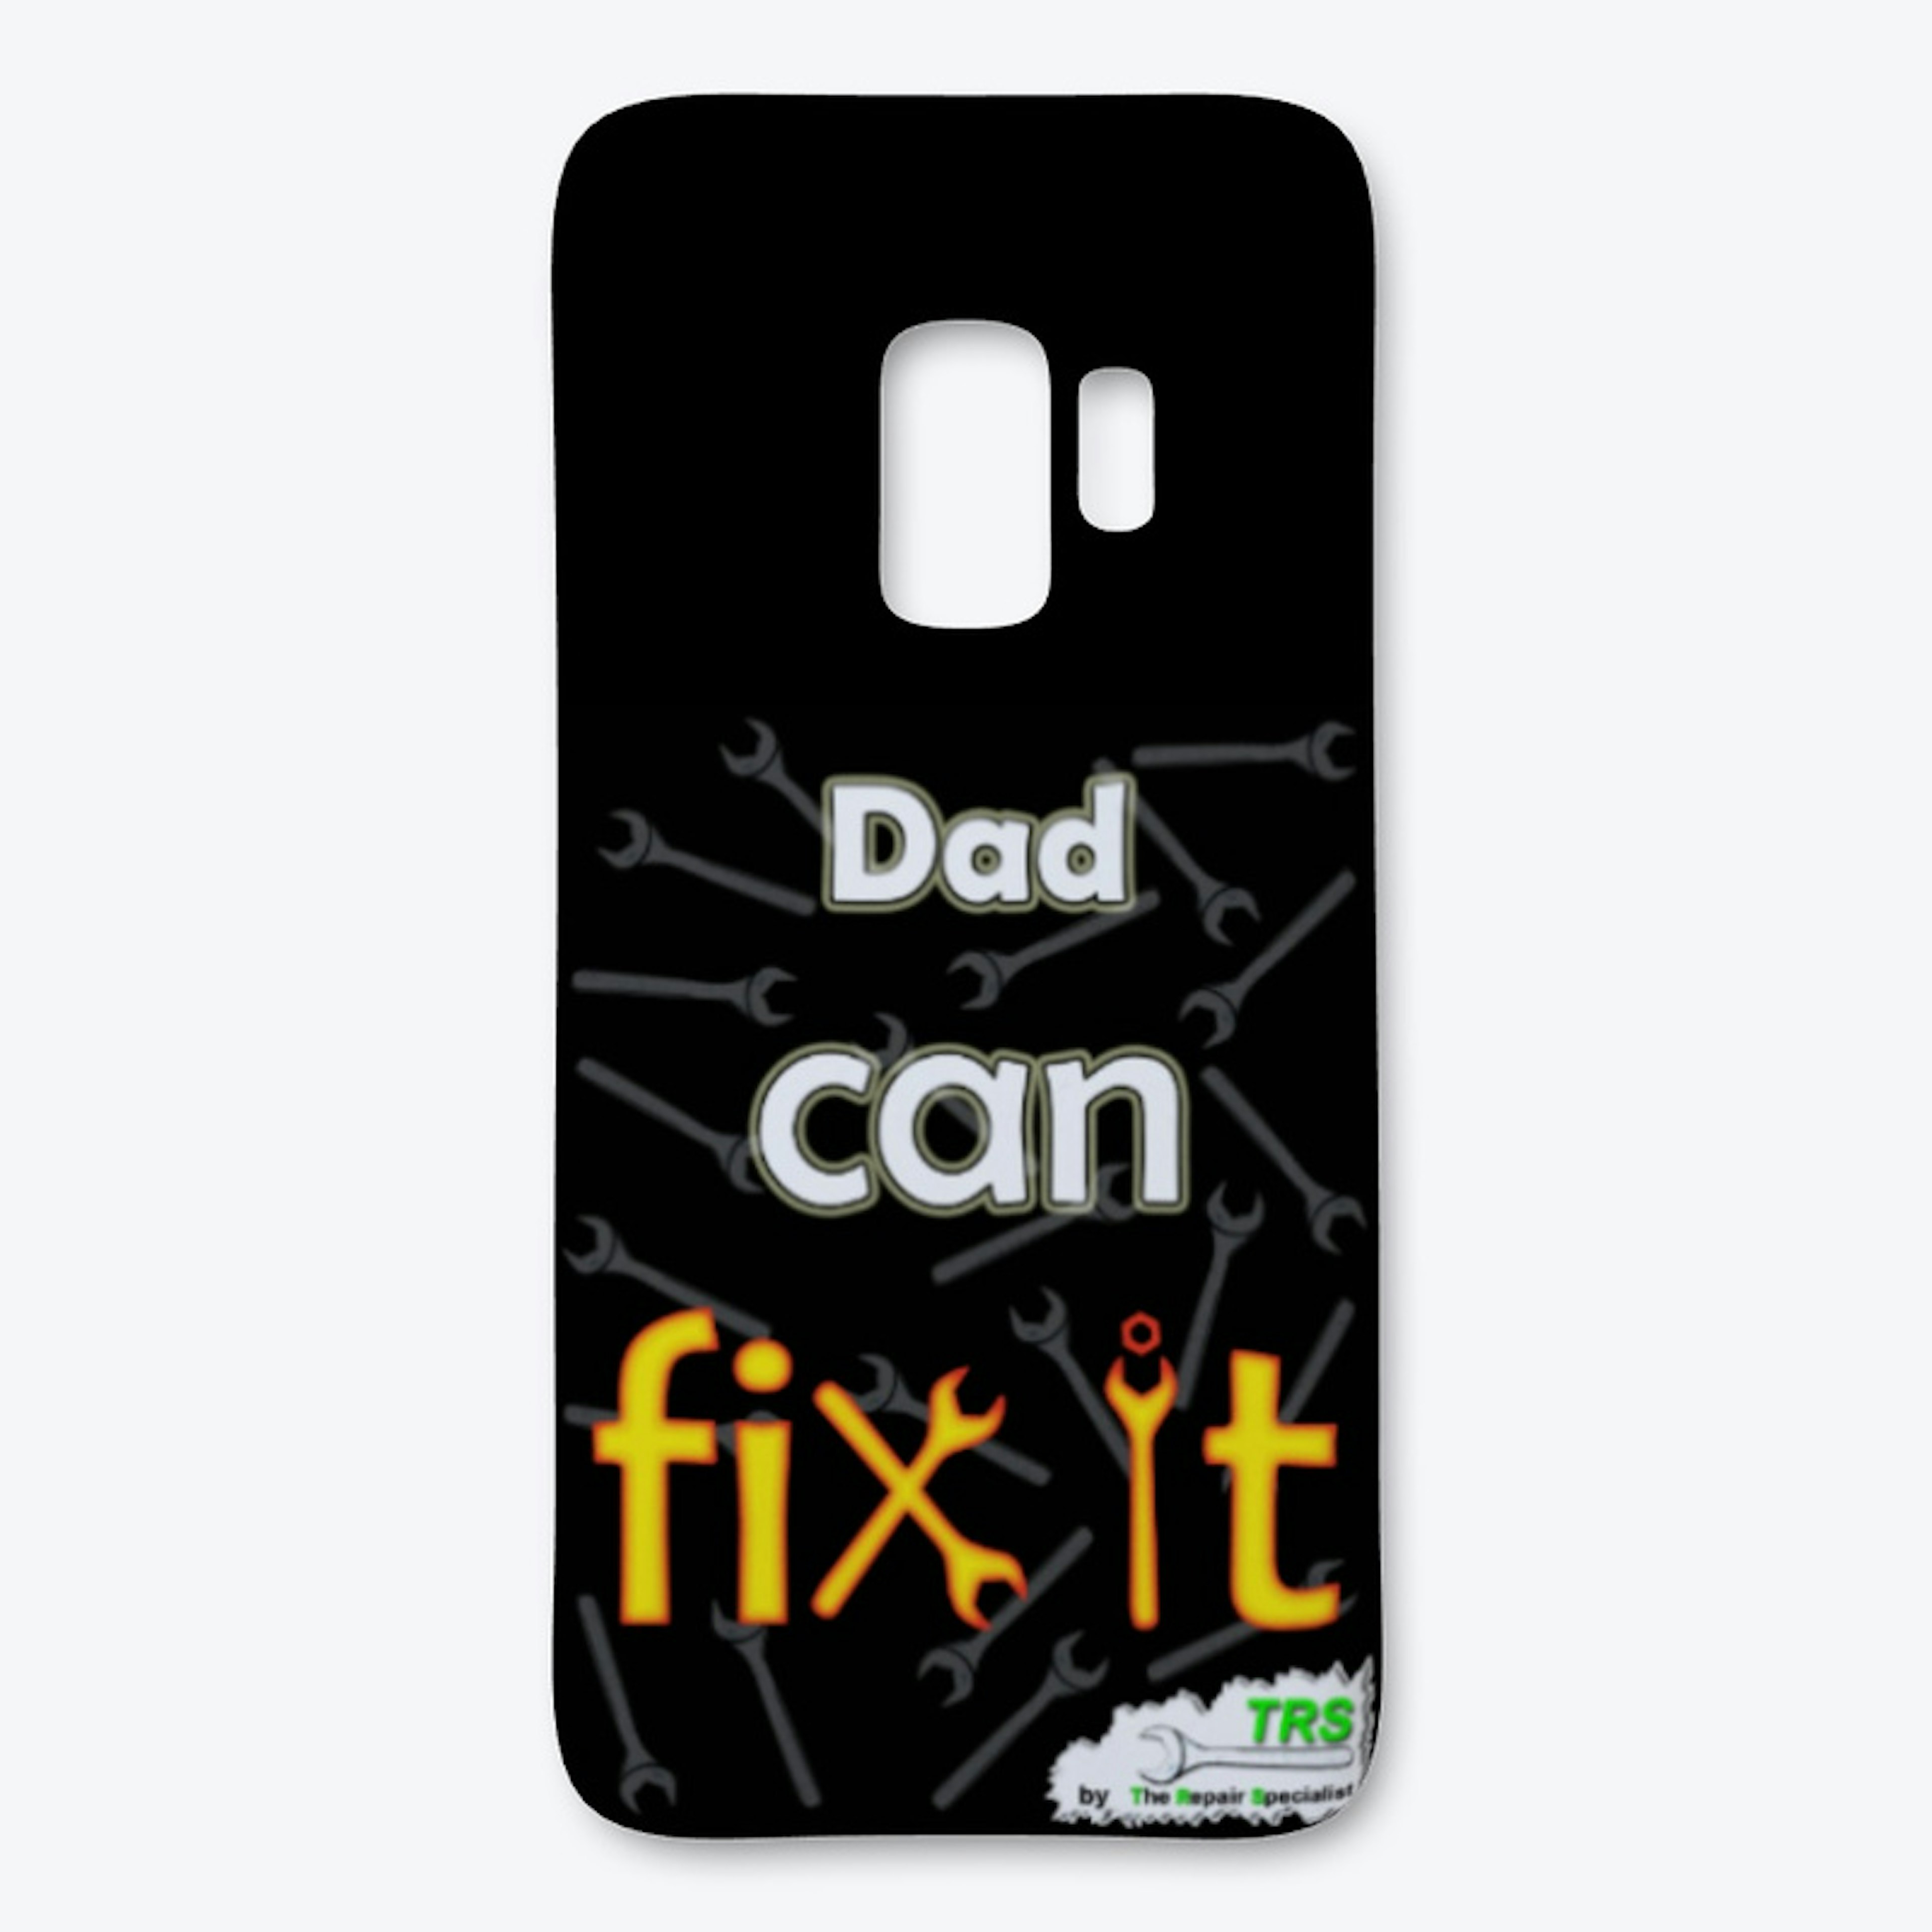 Dad can fix it!